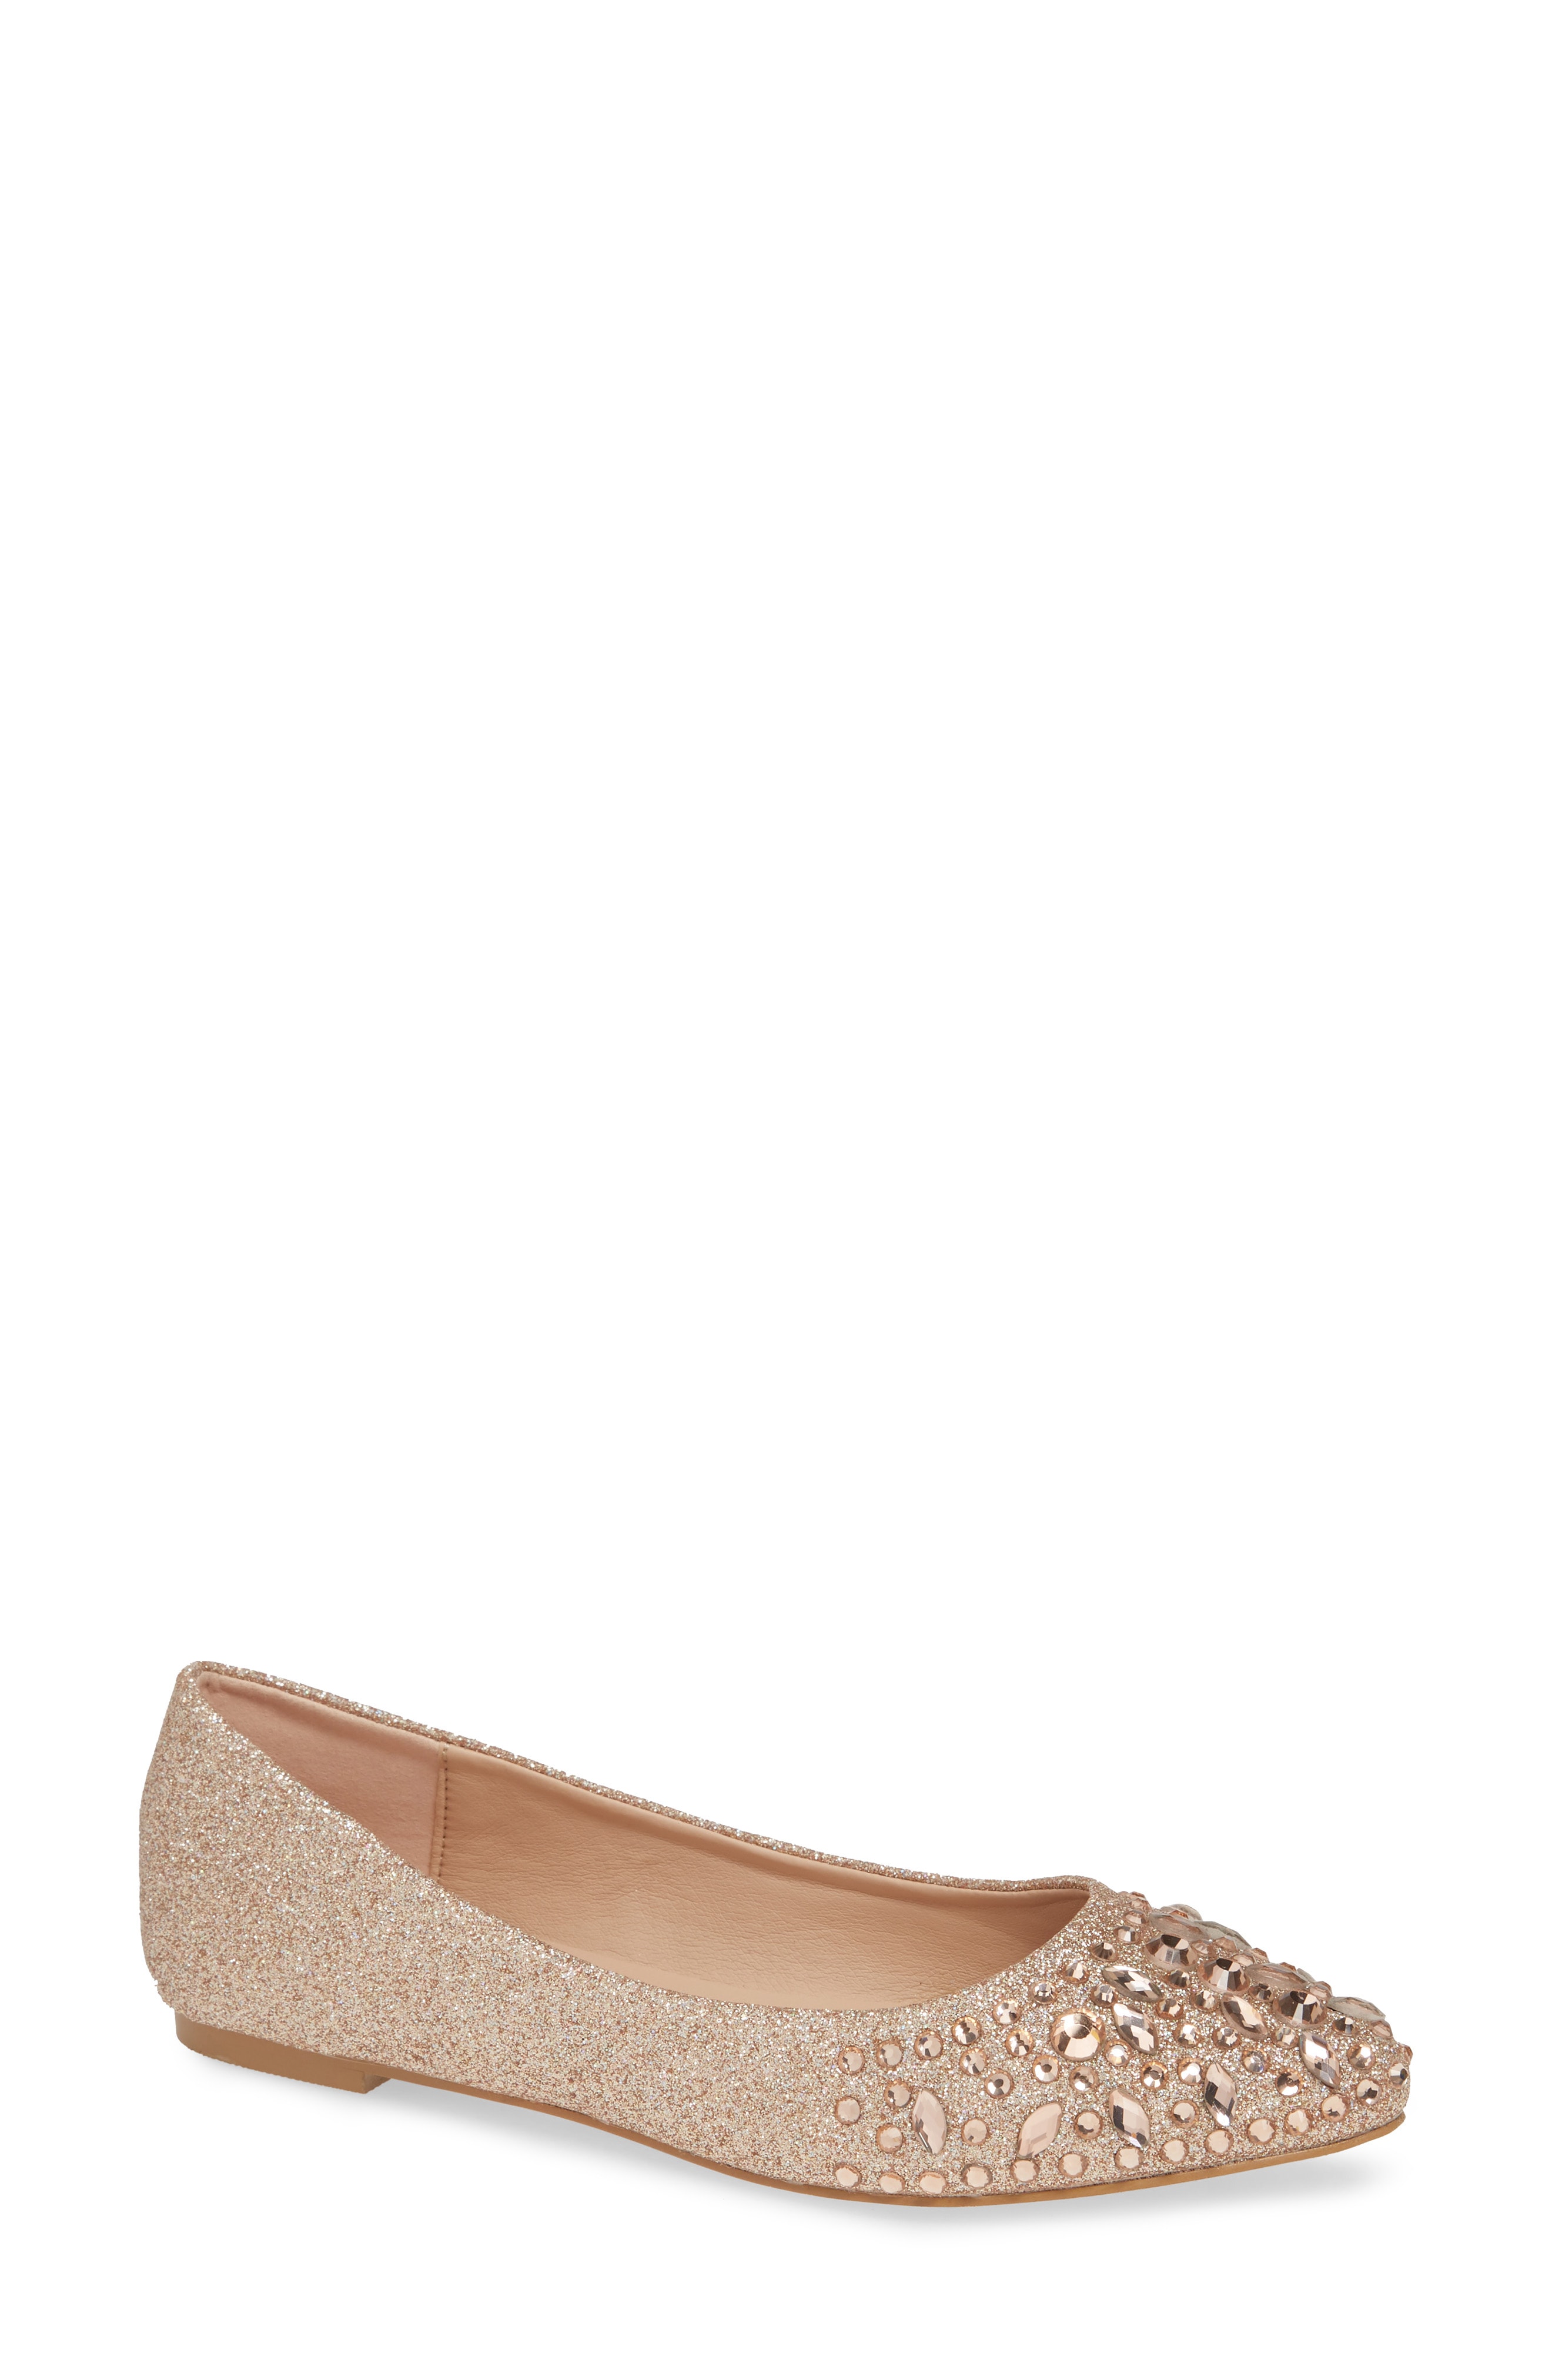 womens rose gold flats | Nordstrom